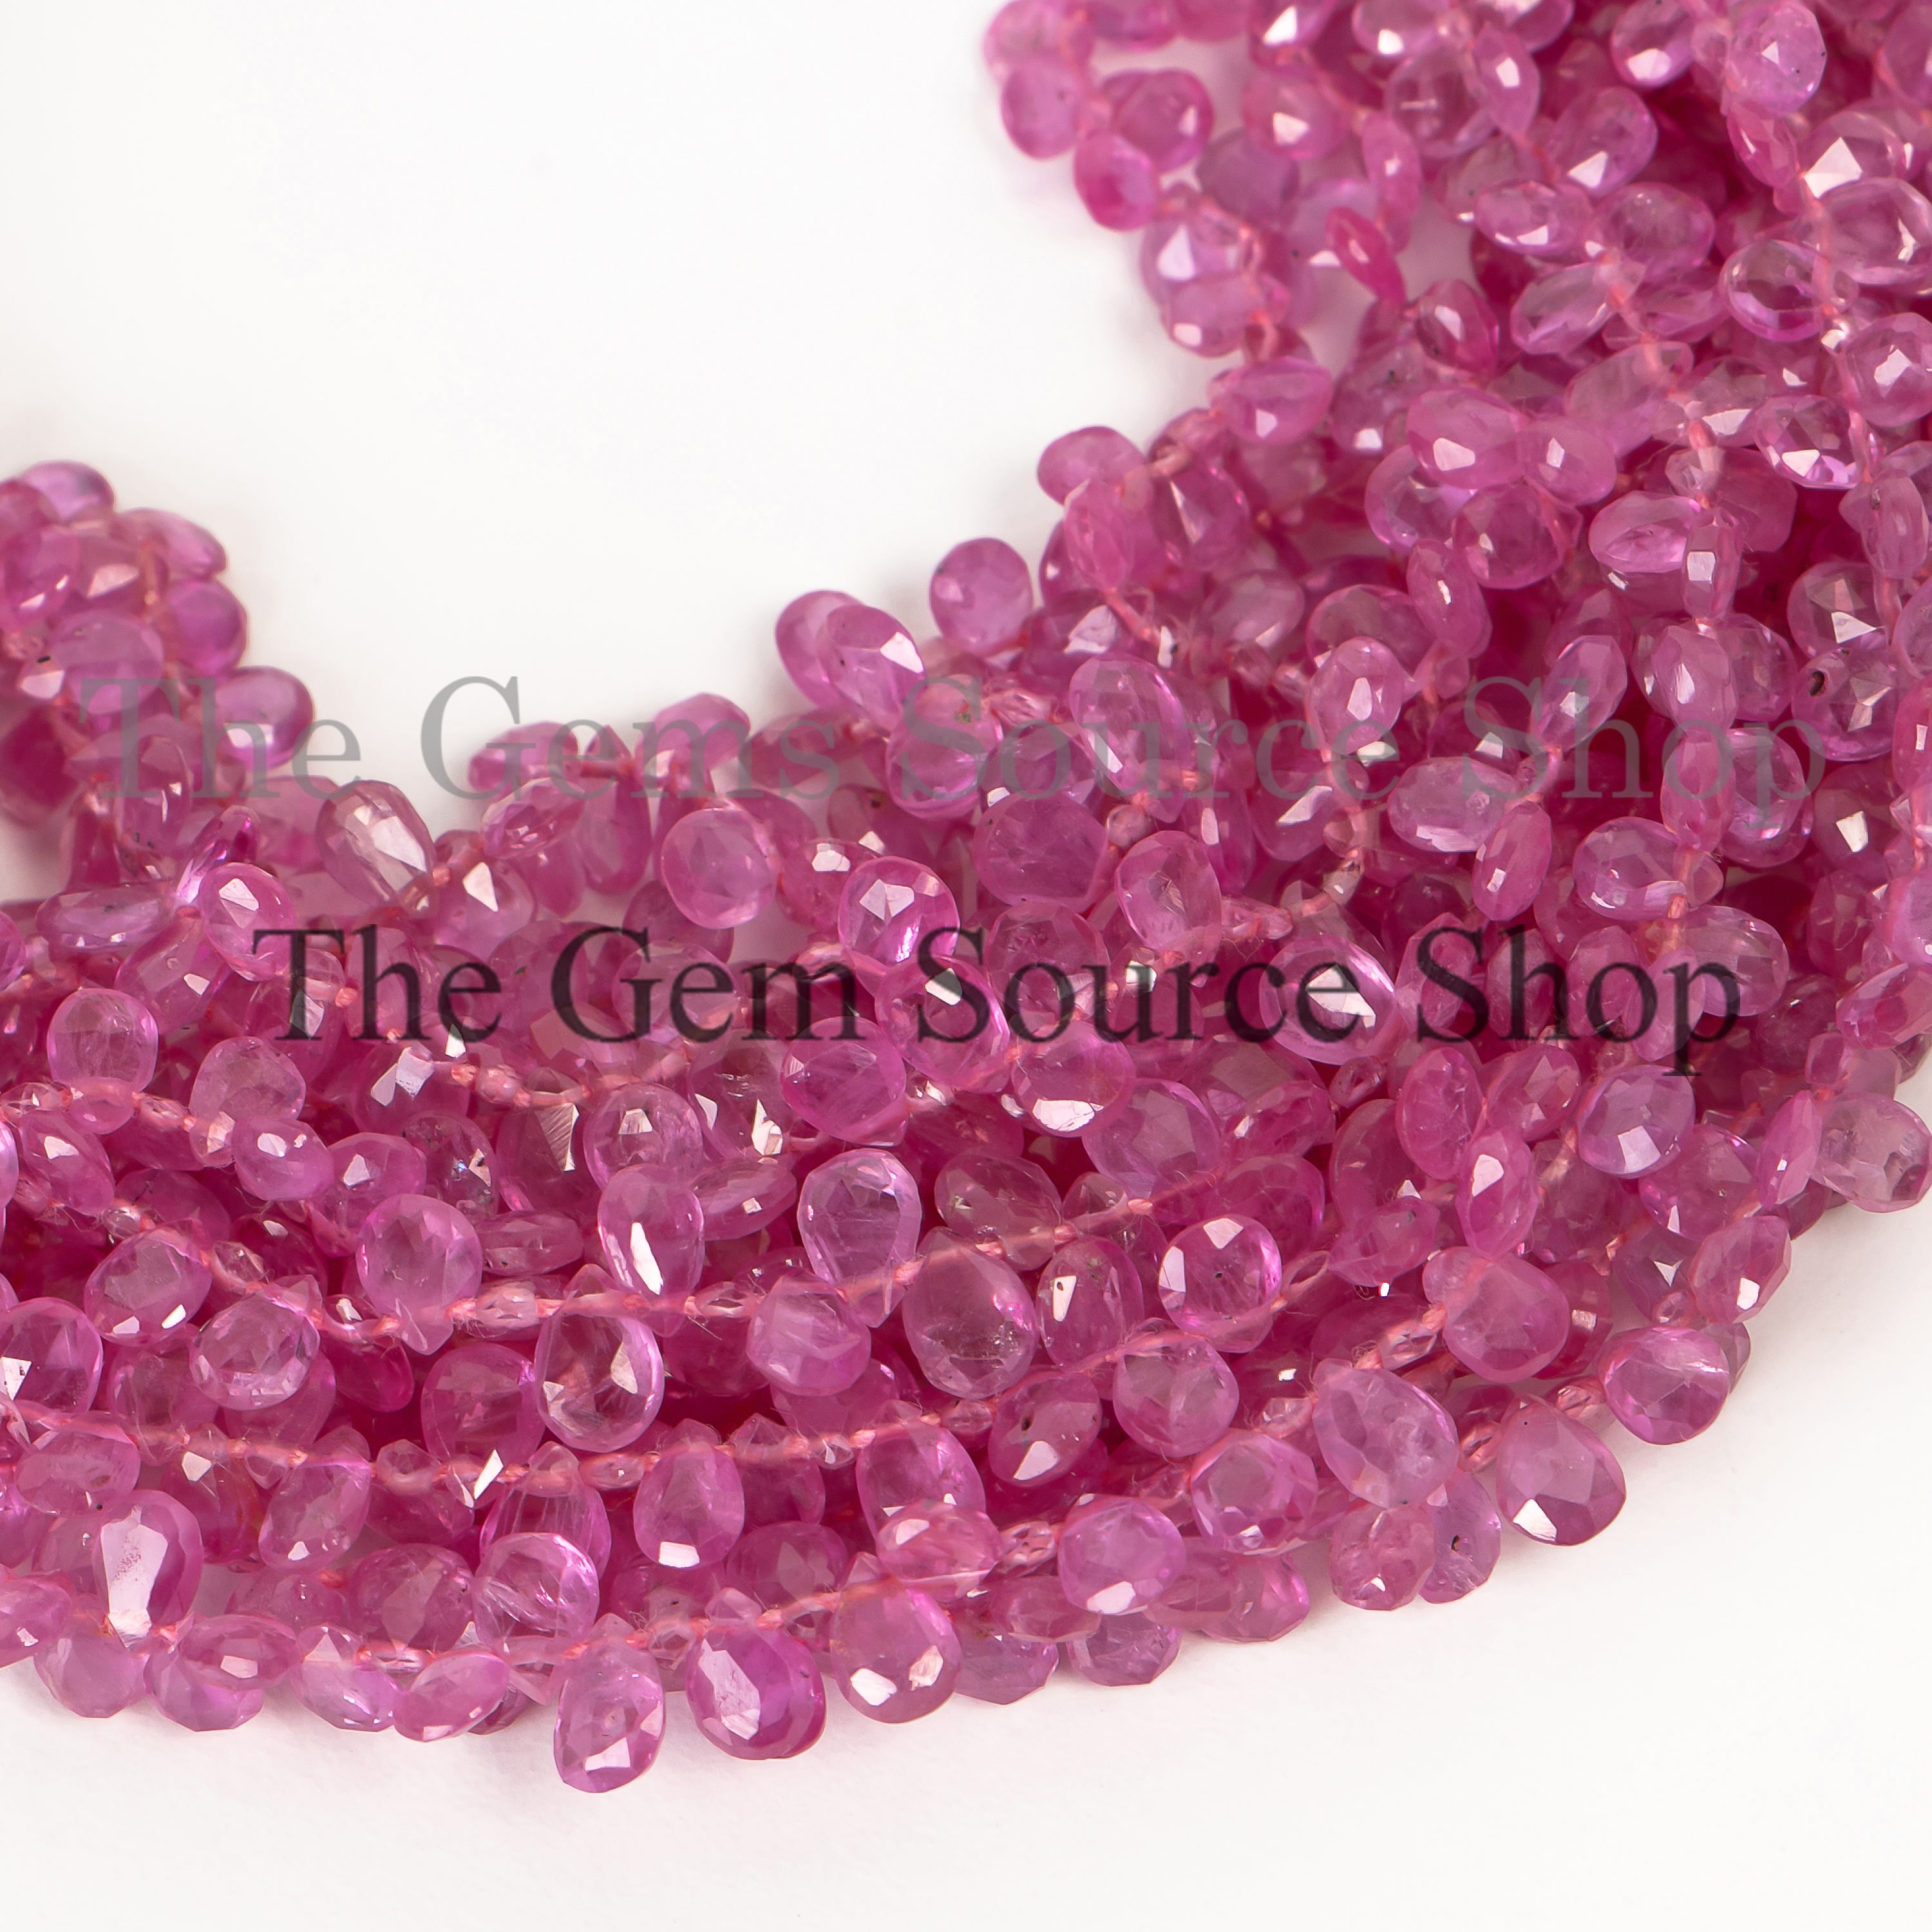 High Quality Burma Ruby Faceted Pear Shape Gemstone Natural Beads, Burma Ruby Faceted Beads, Burma Ruby Pear Shape Beads, Burma Ruby Beads